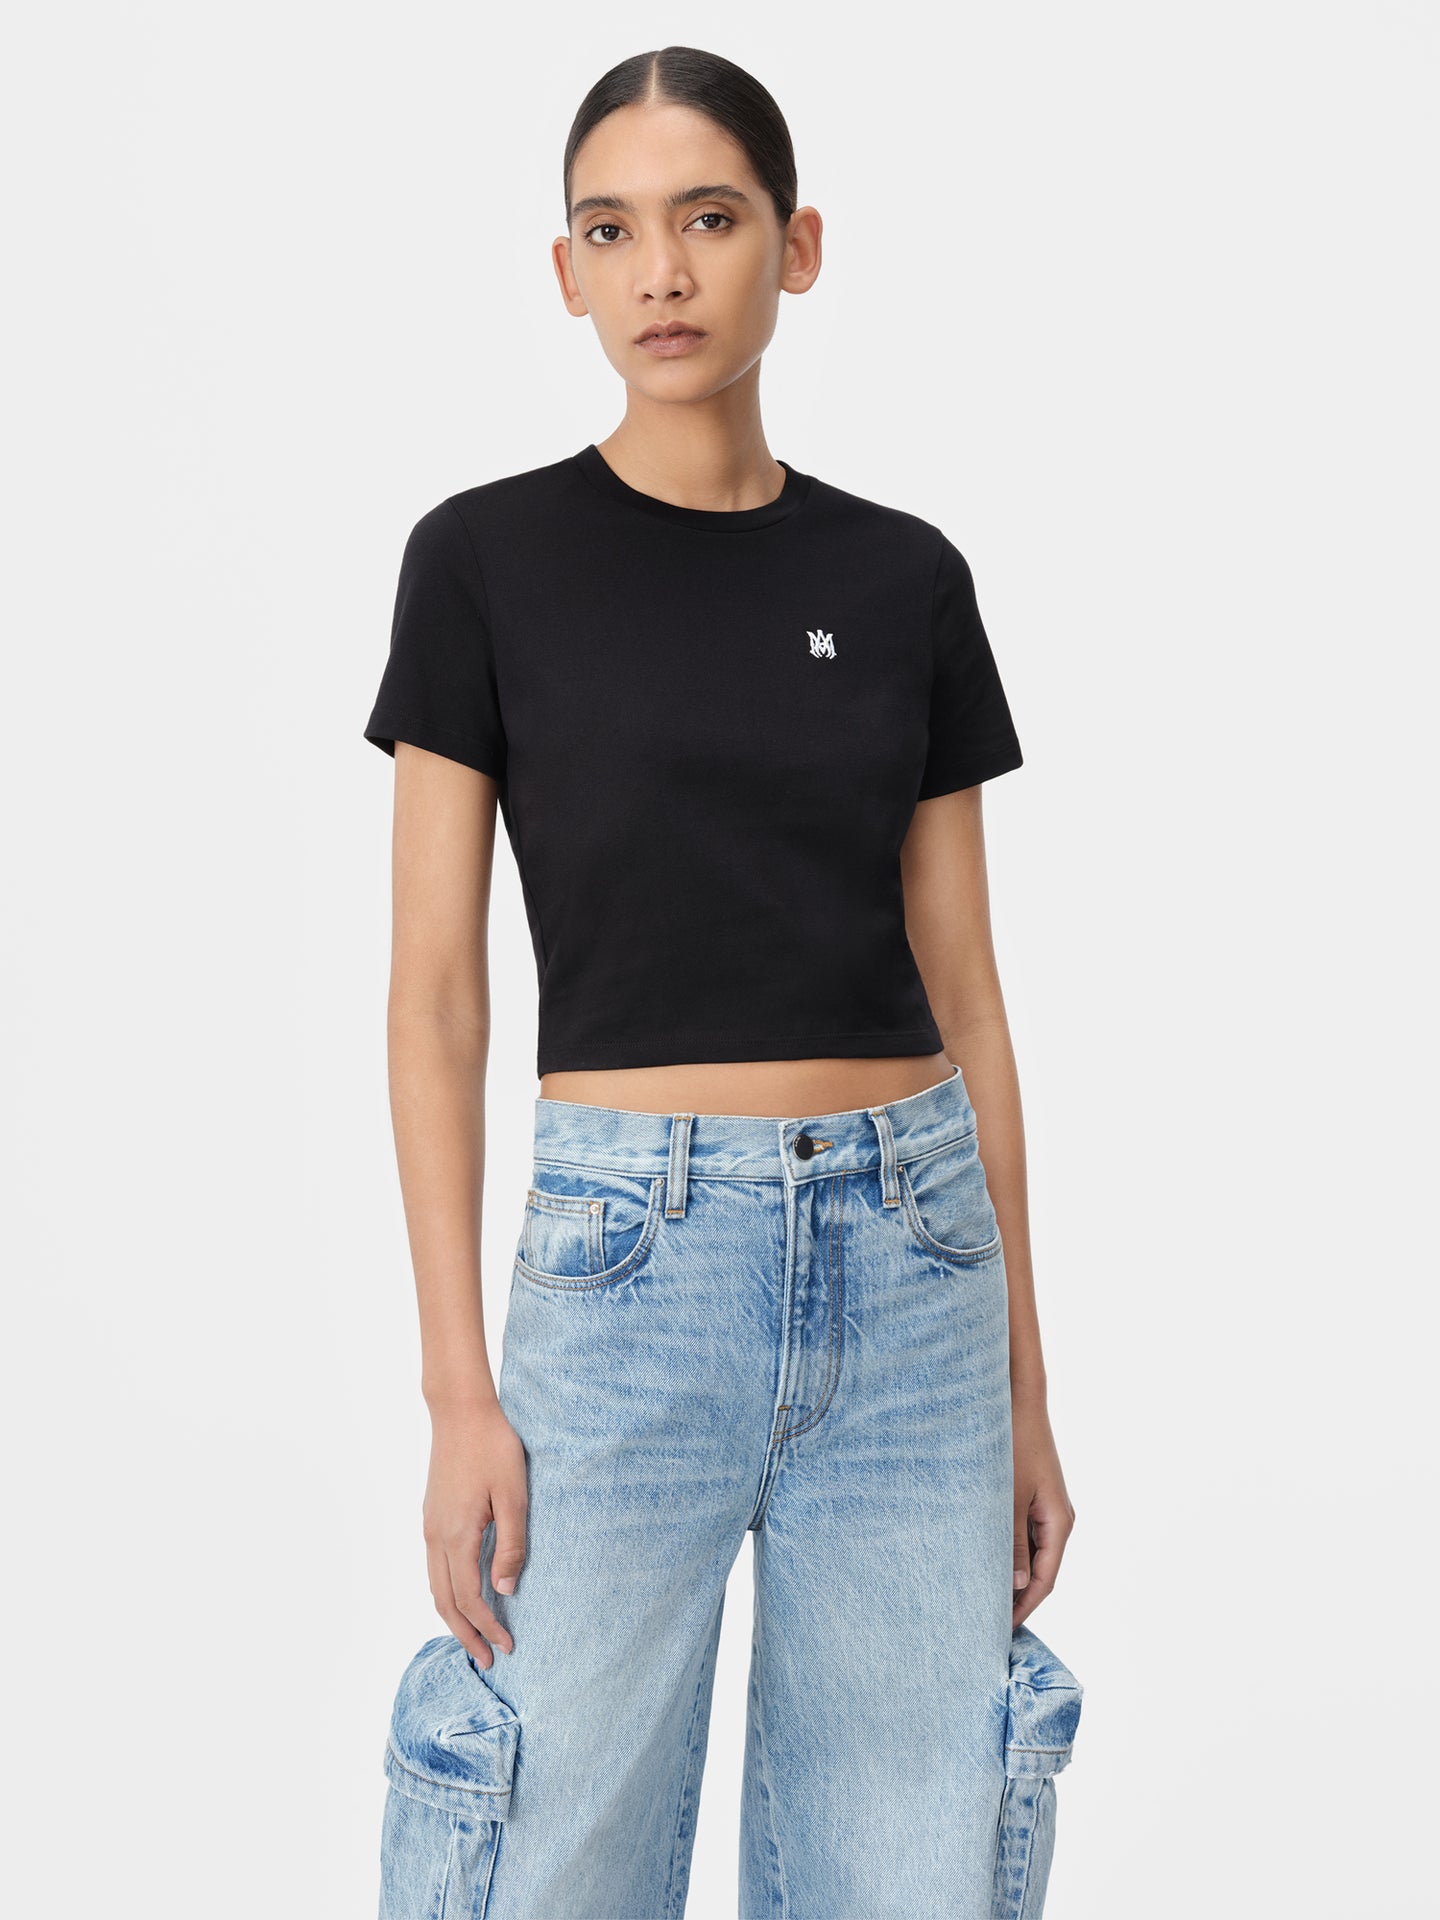 WOMEN - MA EMBROIDERED BABY TEE - Black